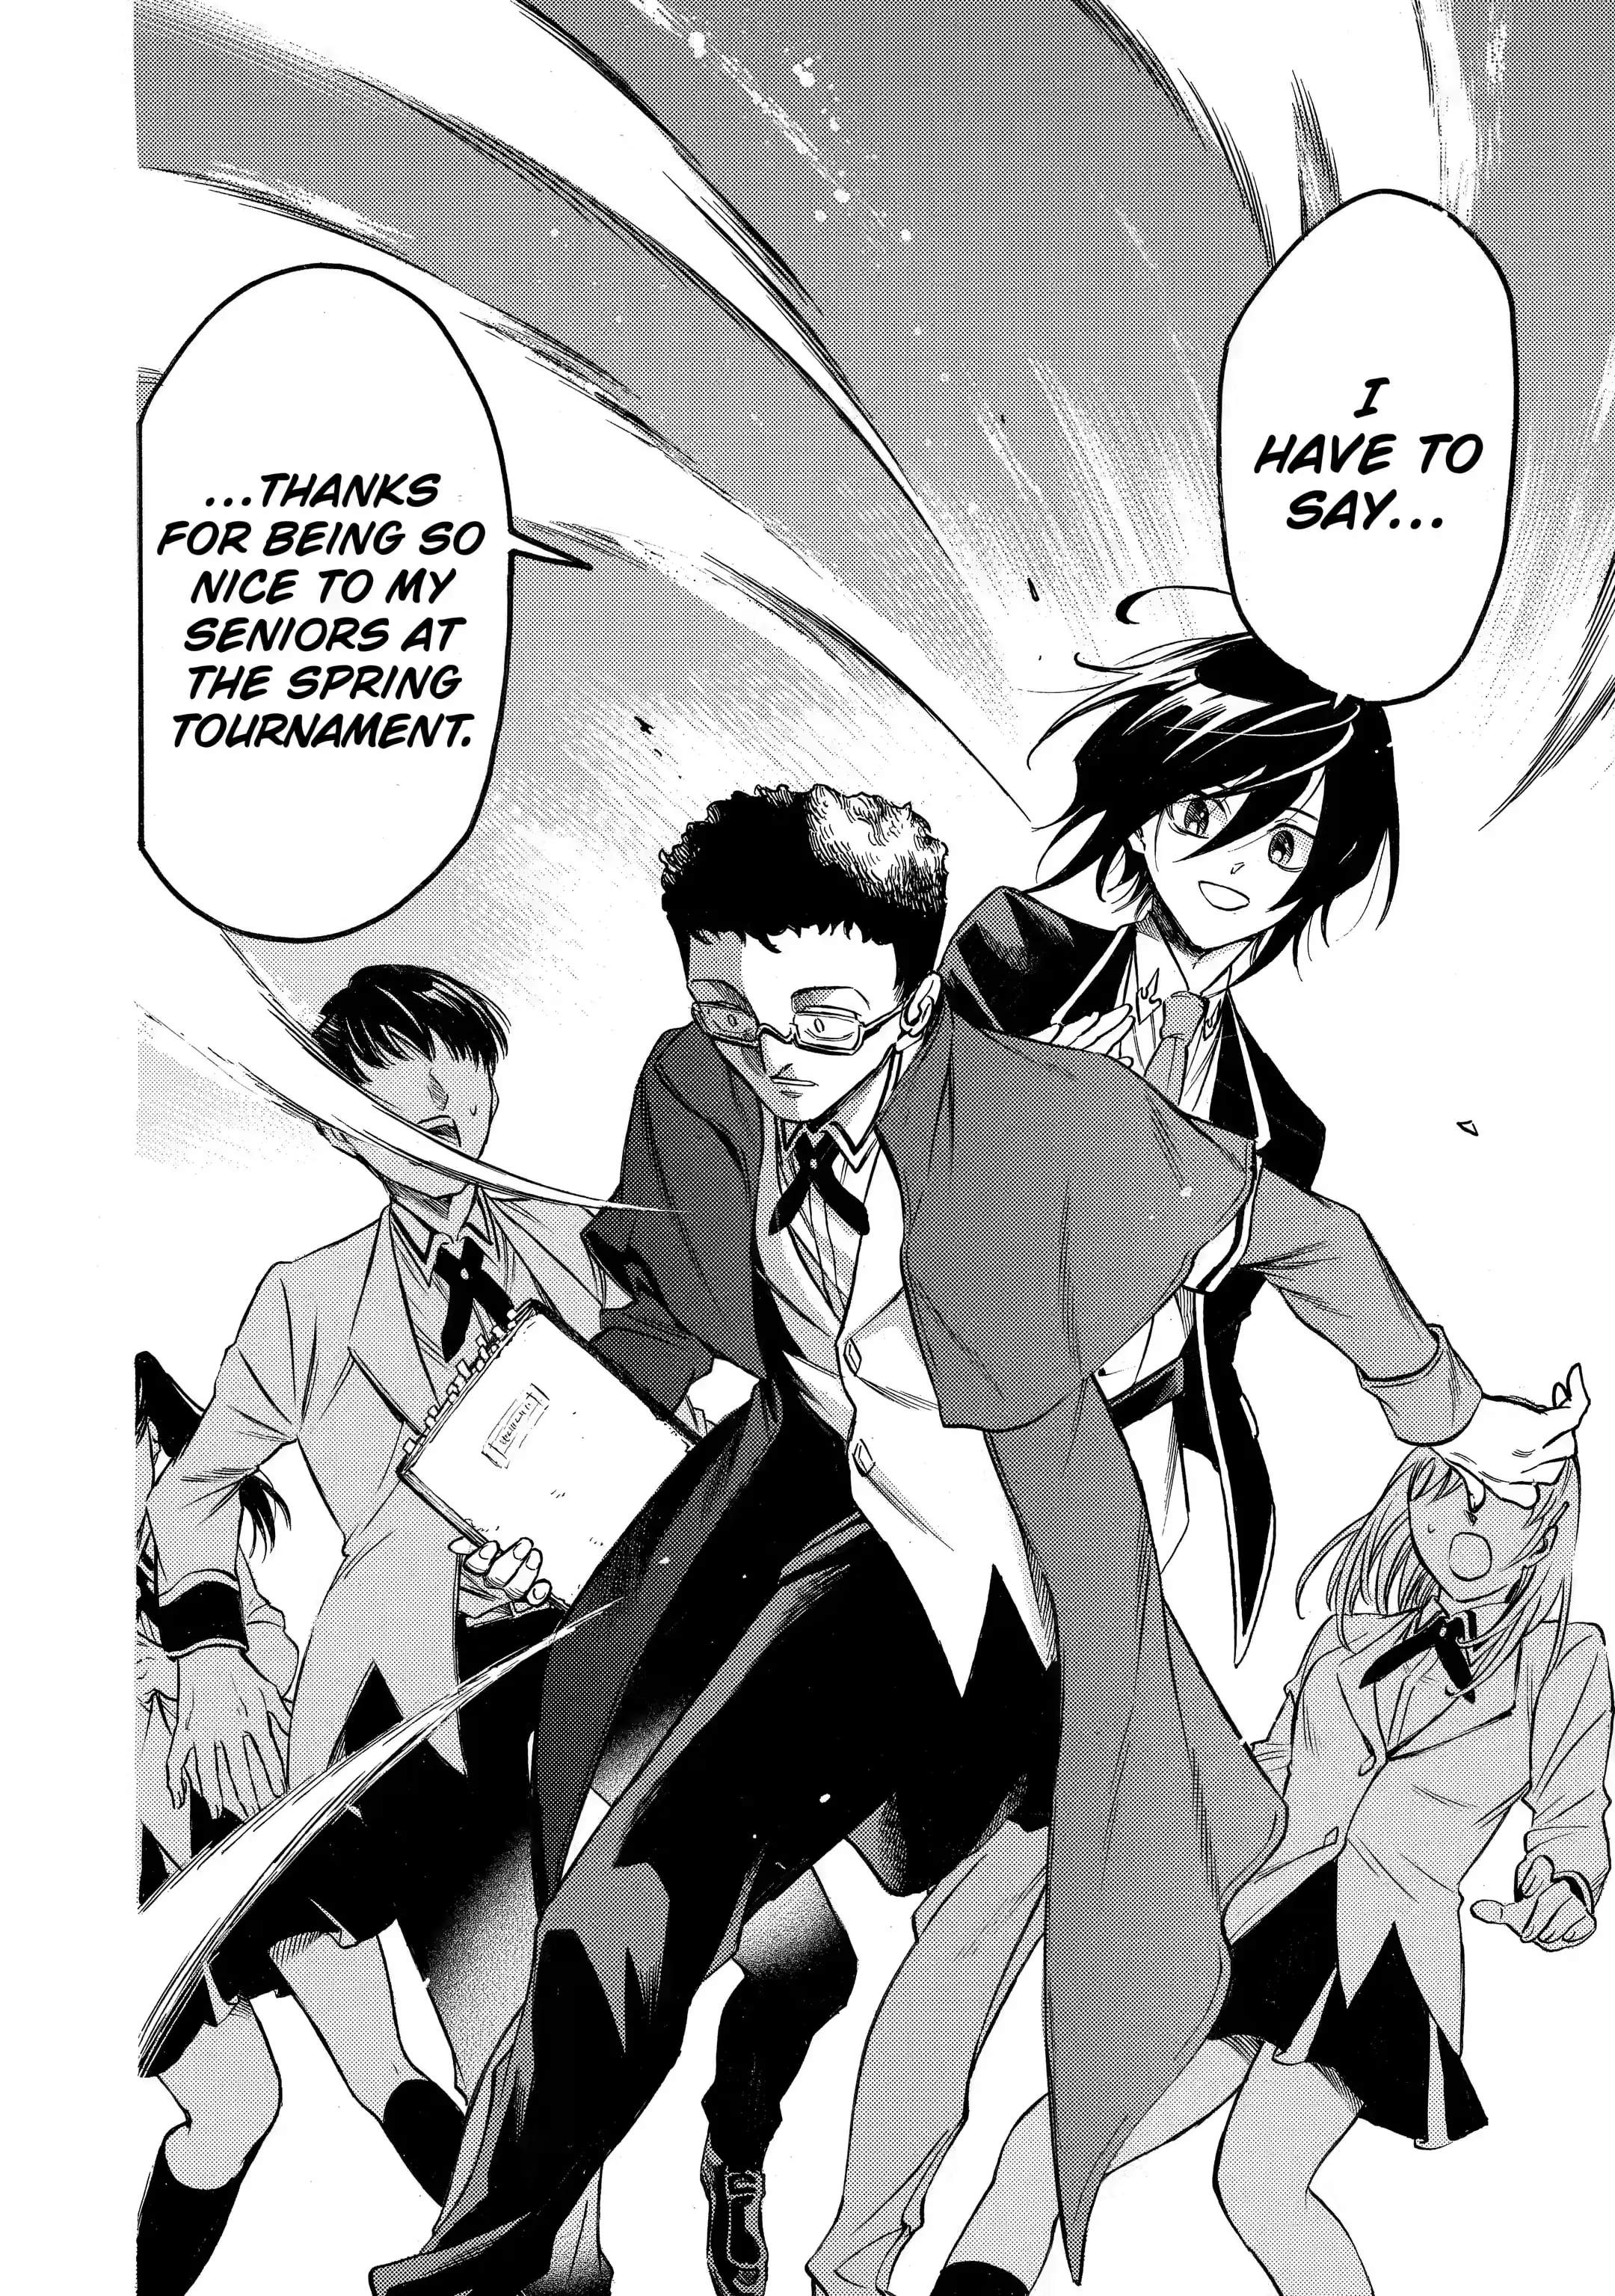 Reincarnation of the Unrivalled Time Mage: The Underachiever at the Magic Academy Turns Out to Be the Strongest Mage Who Controls Time! Chapter 14.2-eng-li - Page 3